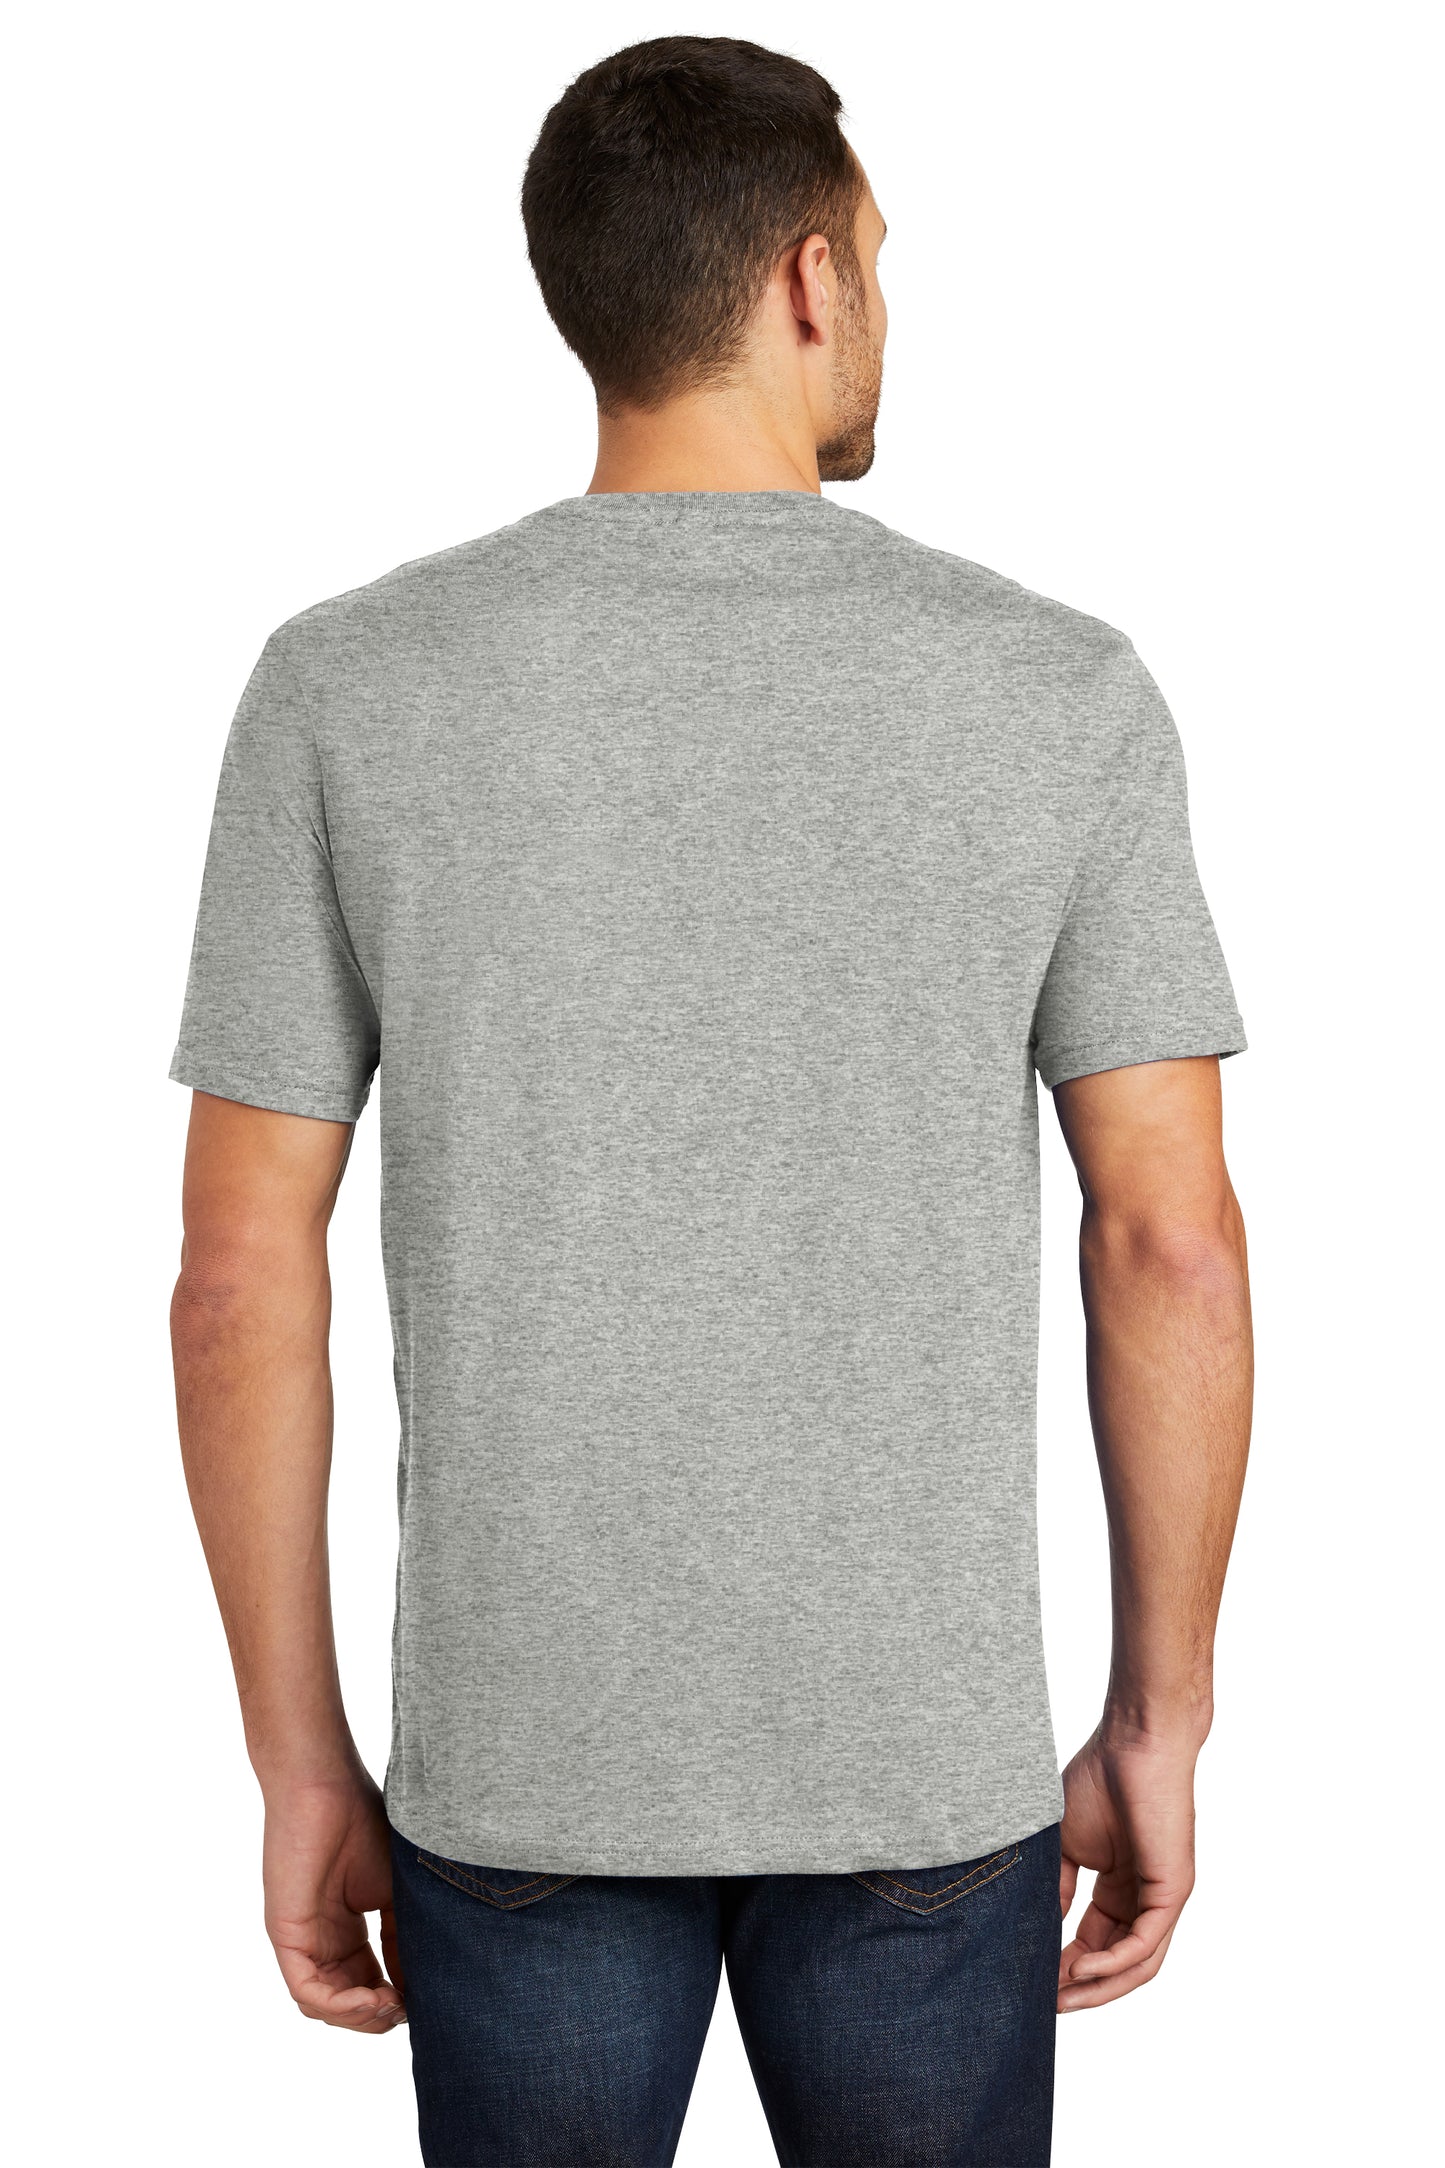 District Perfect Weight Unisex Tee - Heathered Steel